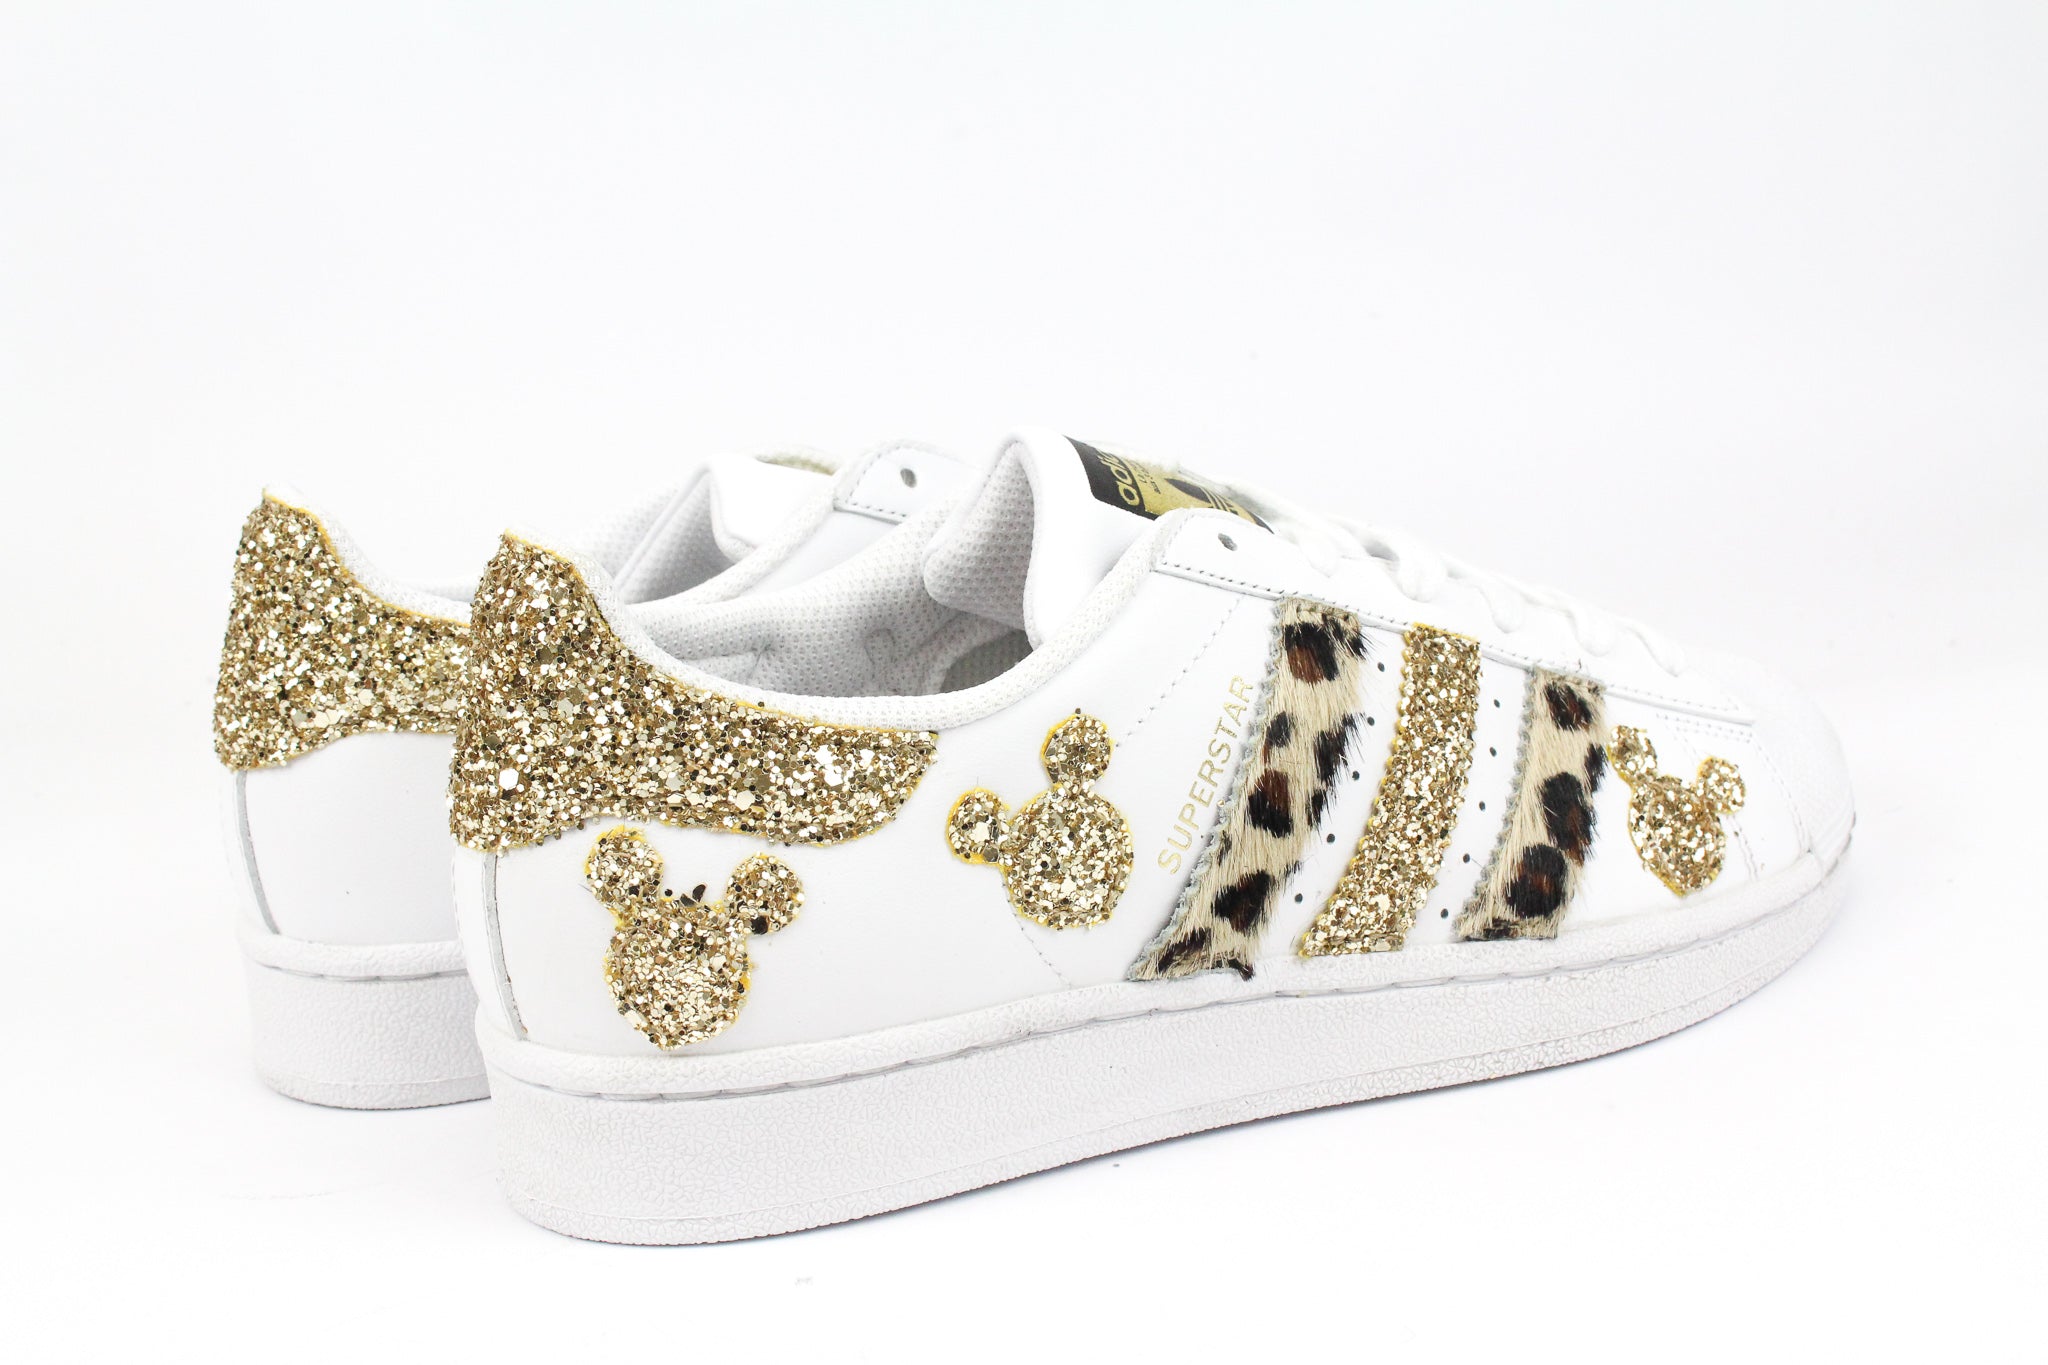 Adidas Superstar Spotted Mice Gold Glitter